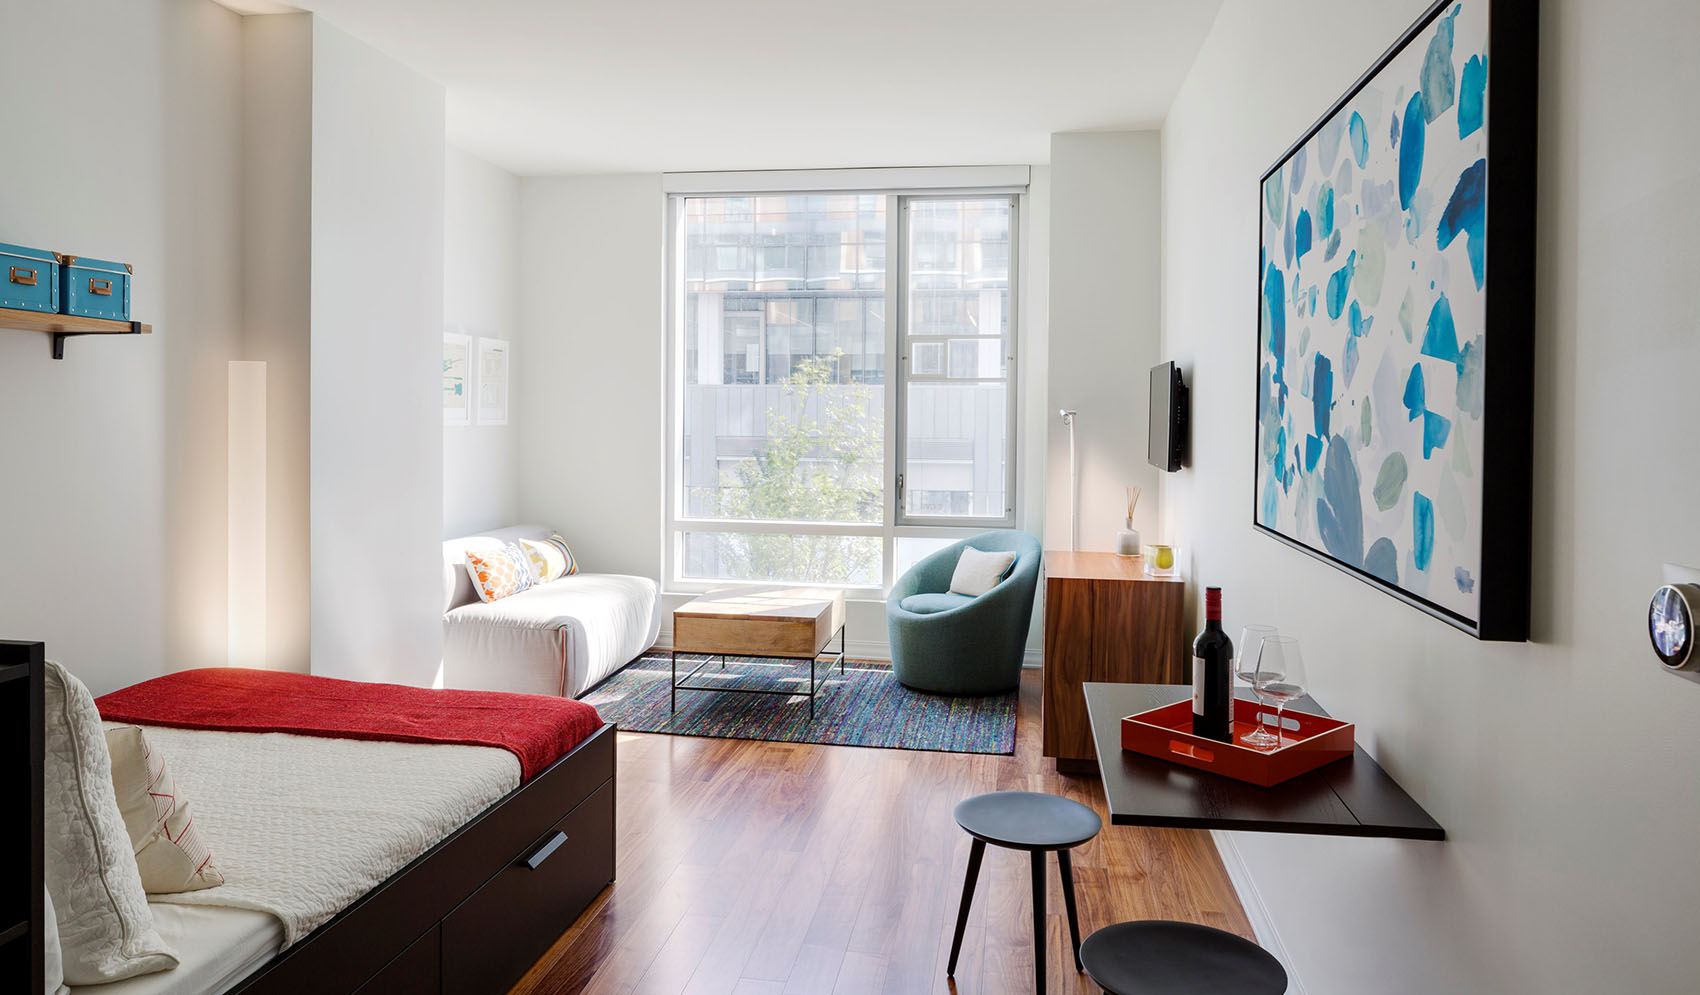 Micro-apartments: Are these tiny units coming to the suburbs?